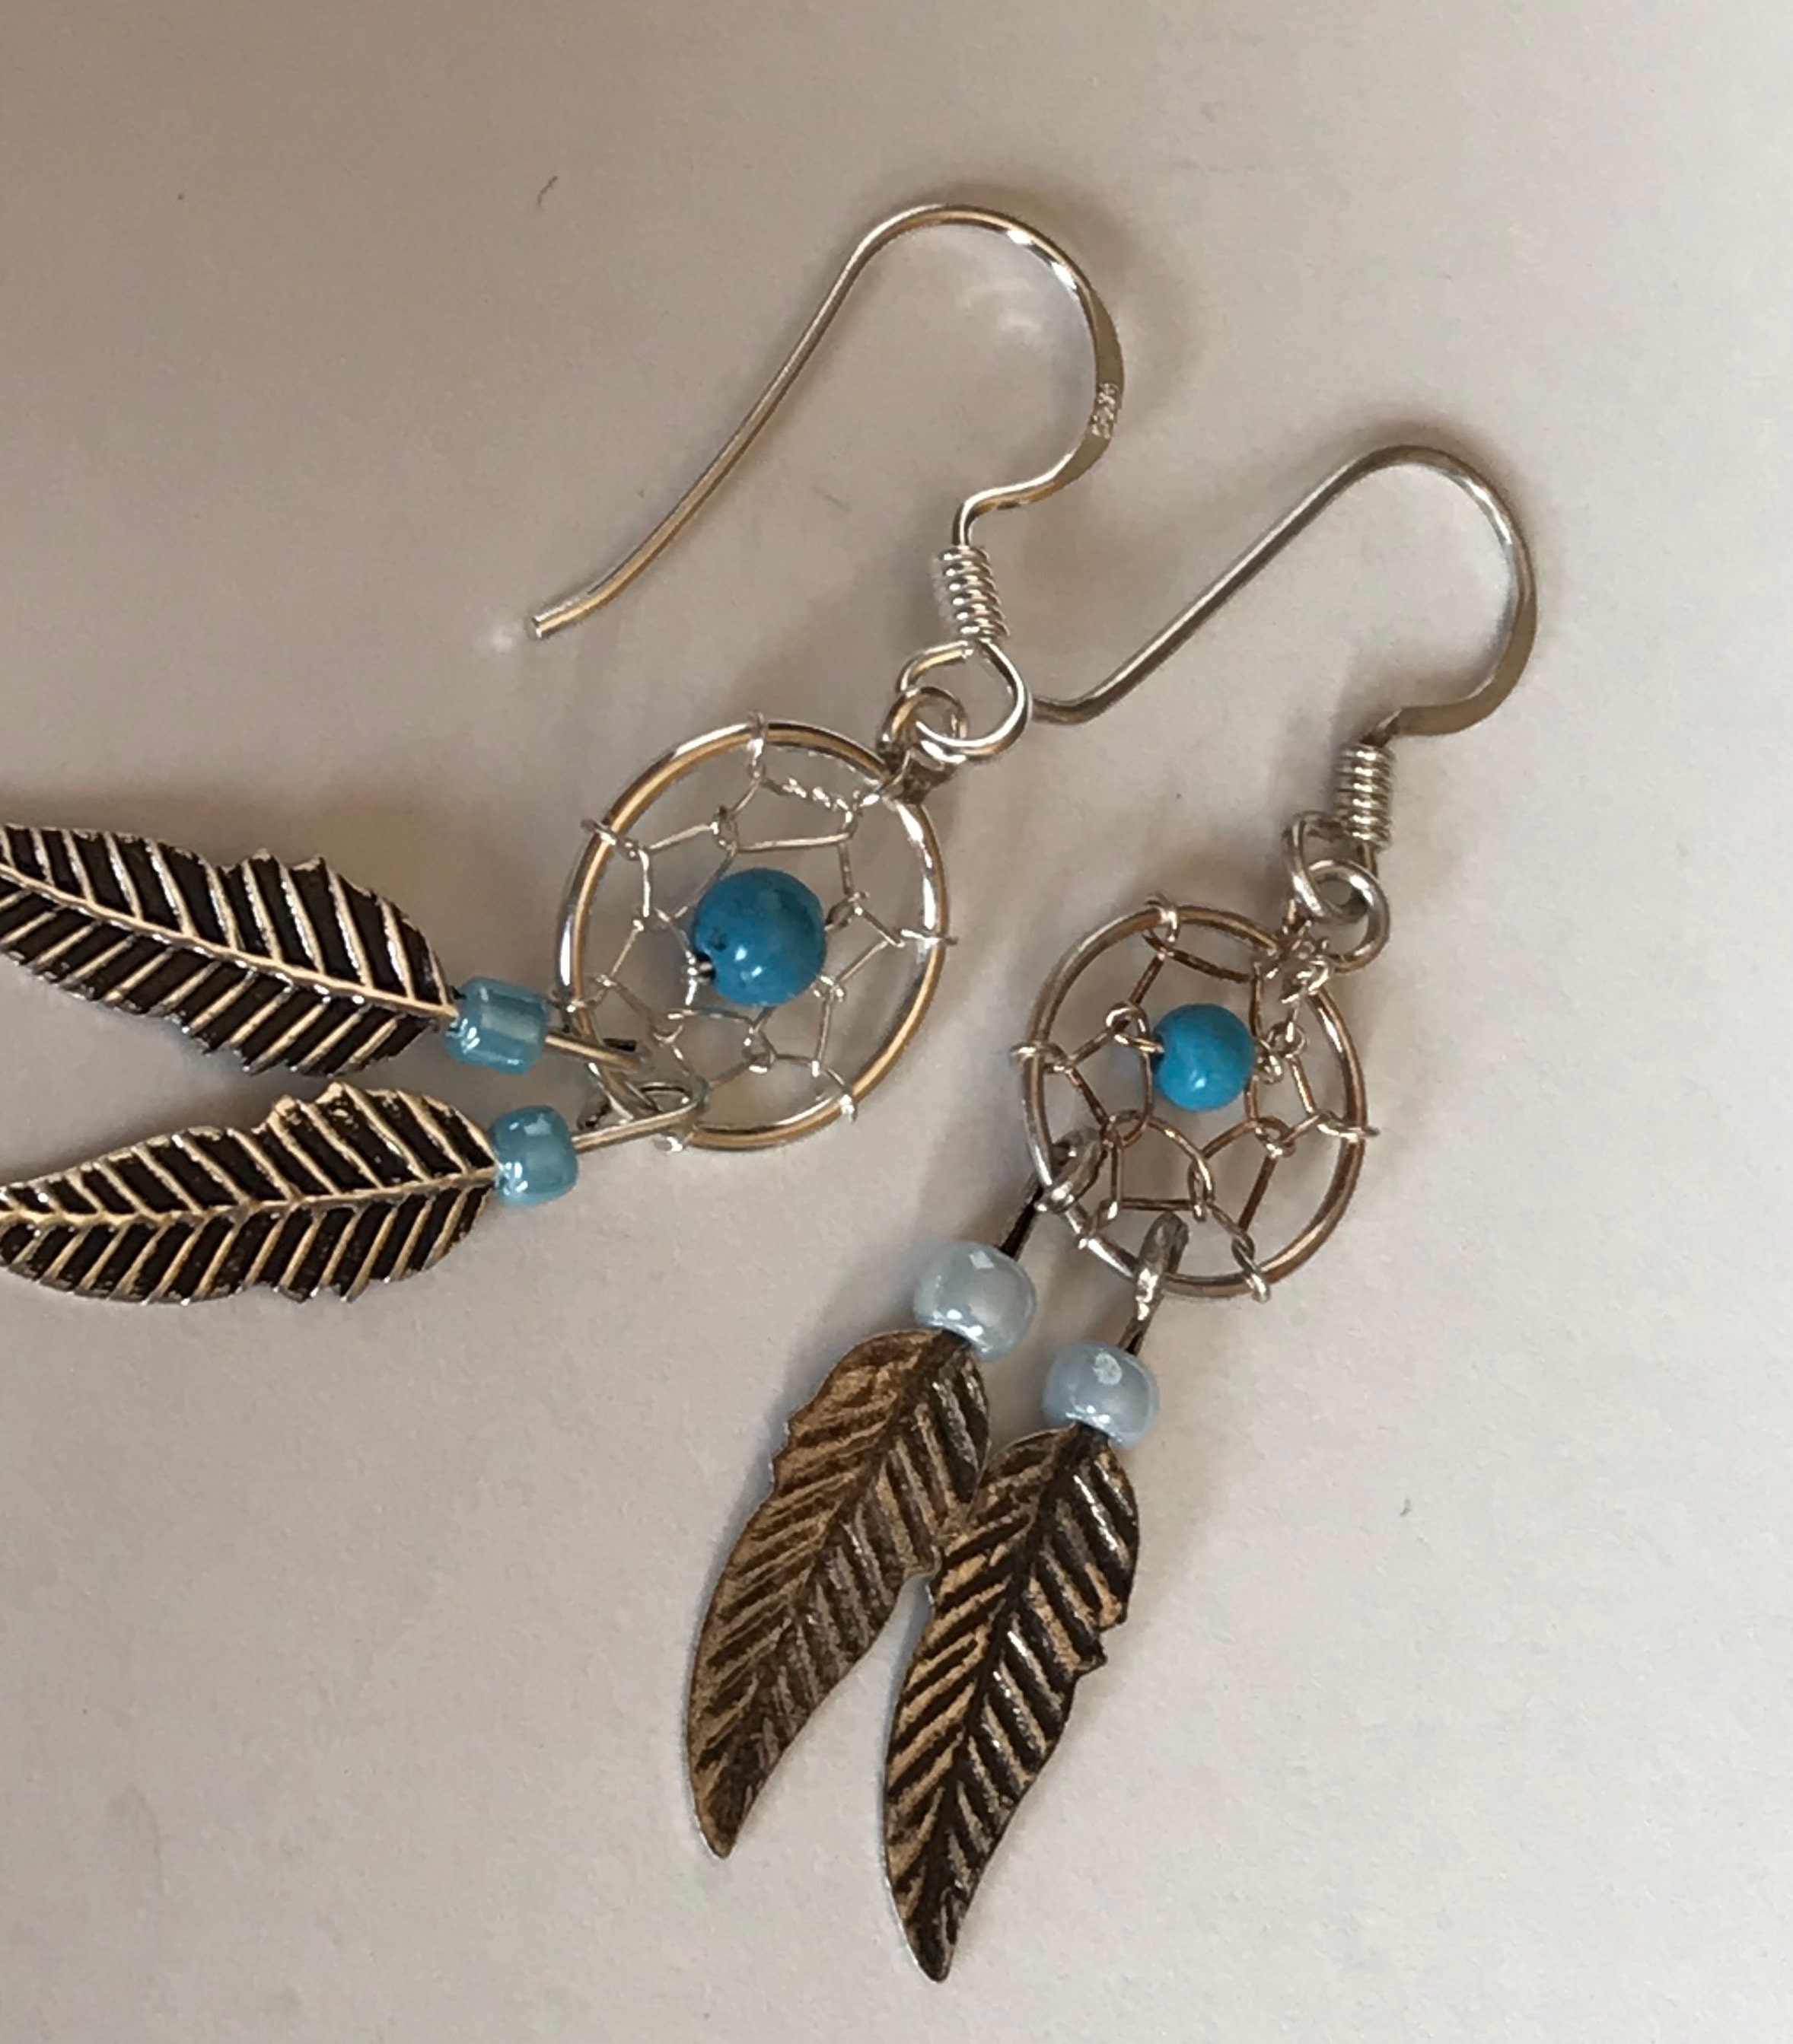 Earrings Dreamcatcher Silver Handmade Sterling 925 Indian Native American  Protection Jewelry Bohemian